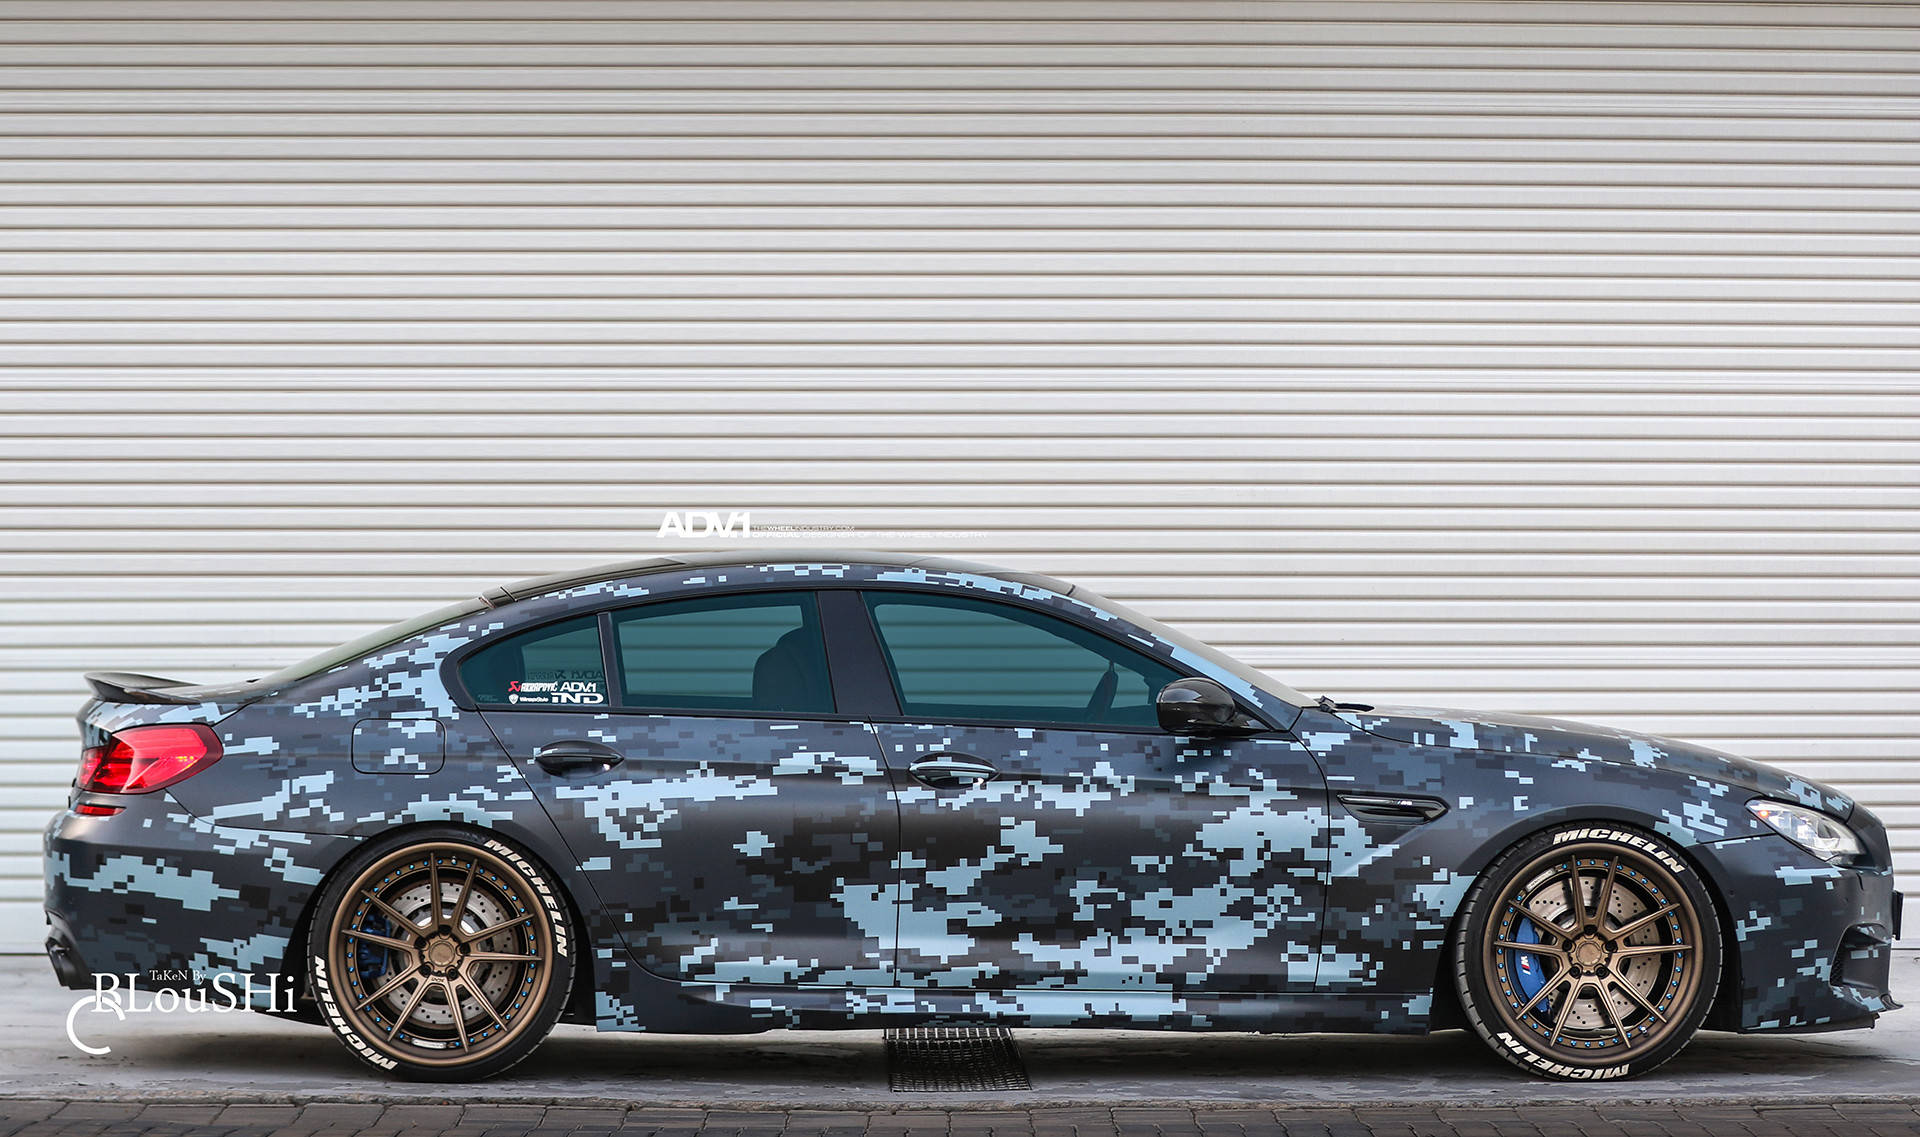 Stealthy Sophistication In The Black Camouflaged Bmw M5 Background